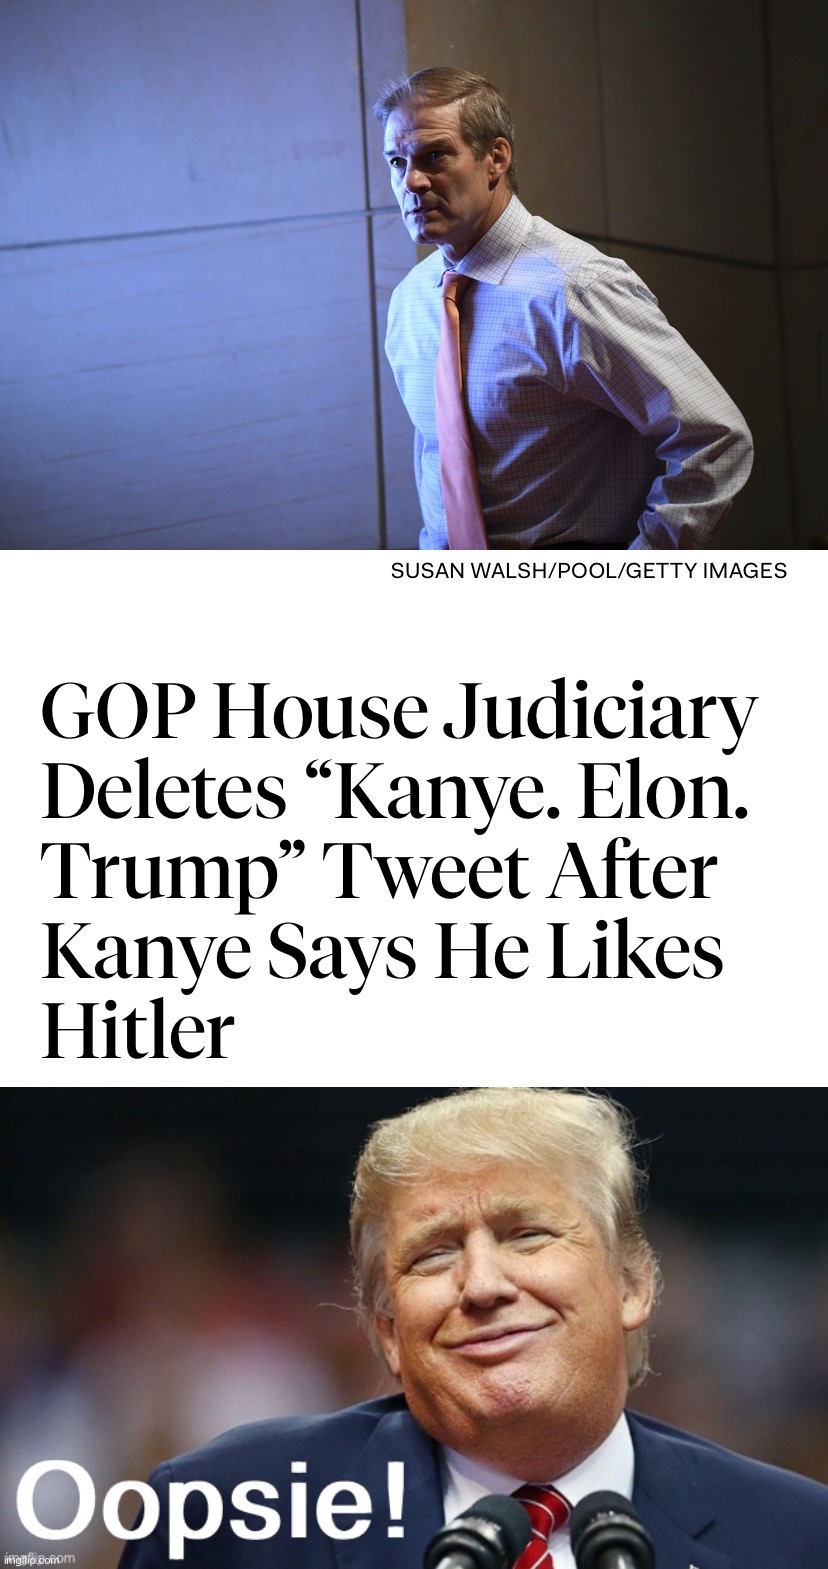 Hot takes that didn't age well | image tagged in hot takes that didn t age well gop house judiciary edition,donald trump oopsie,kanye,elon,trump,kanye elon trump | made w/ Imgflip meme maker